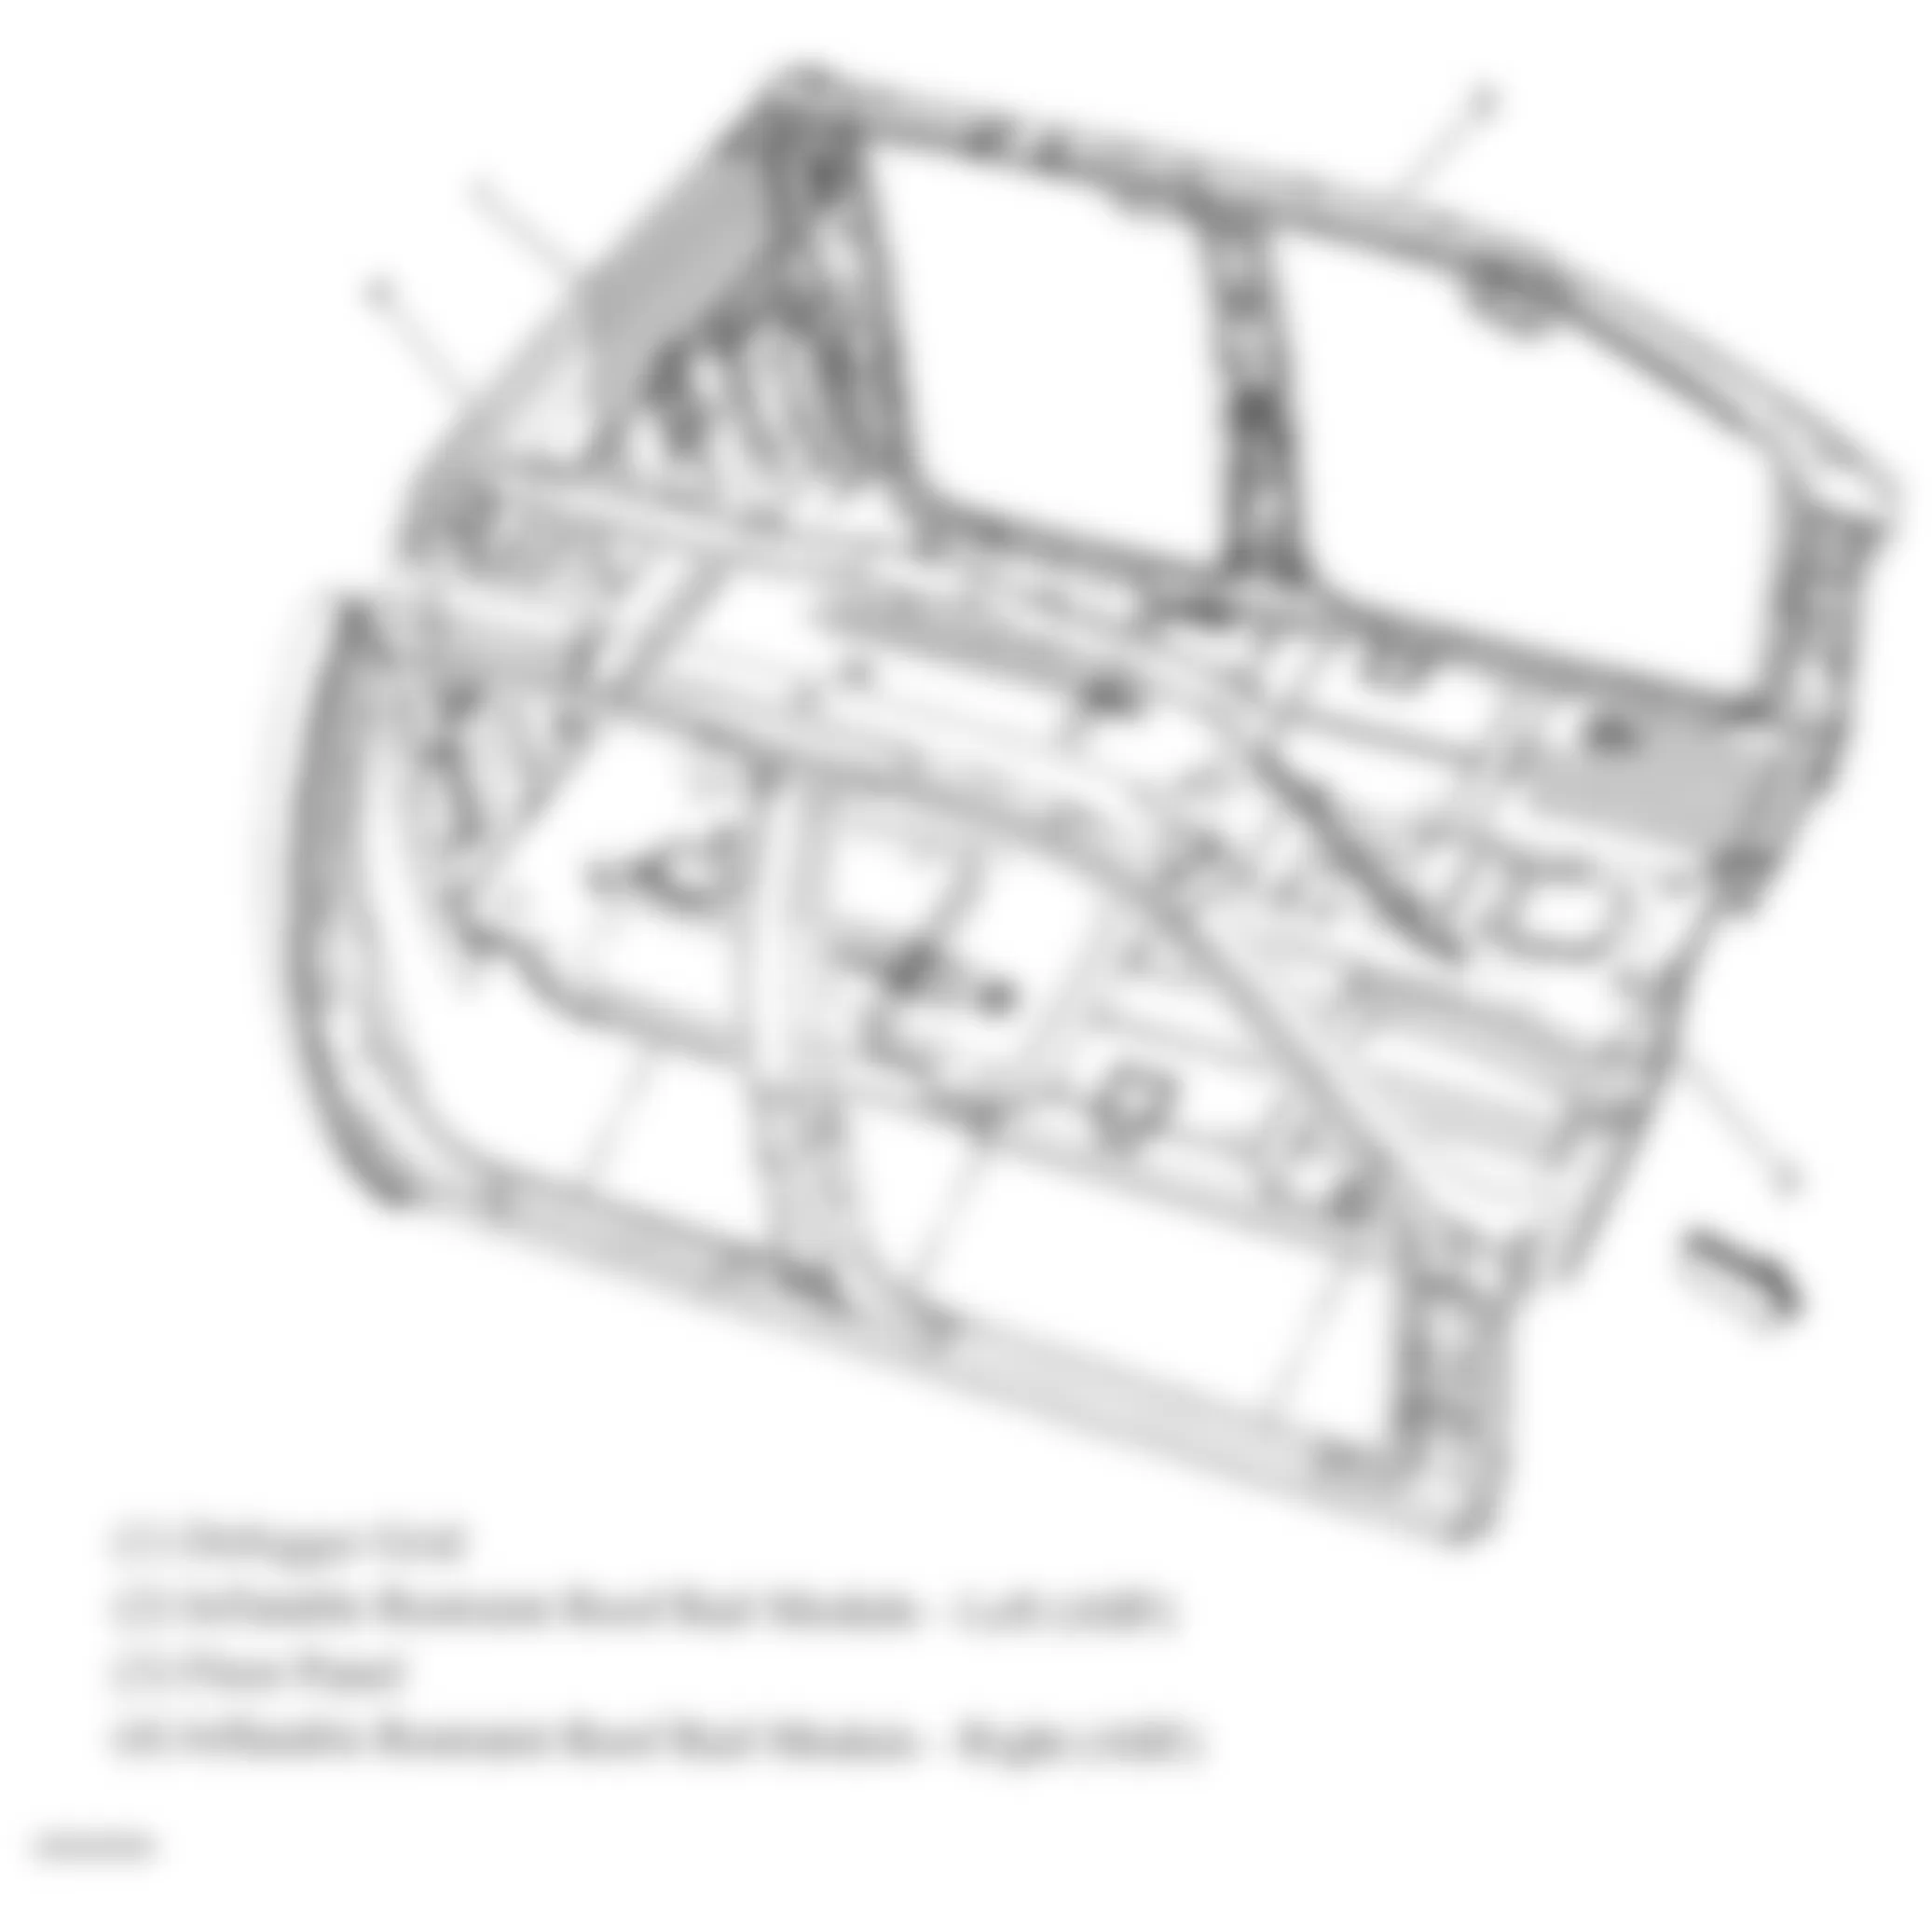 GMC Sierra 1500 2010 - Component Locations -  Roof Rail Air Bags (Extended Cab & Crew Cab)